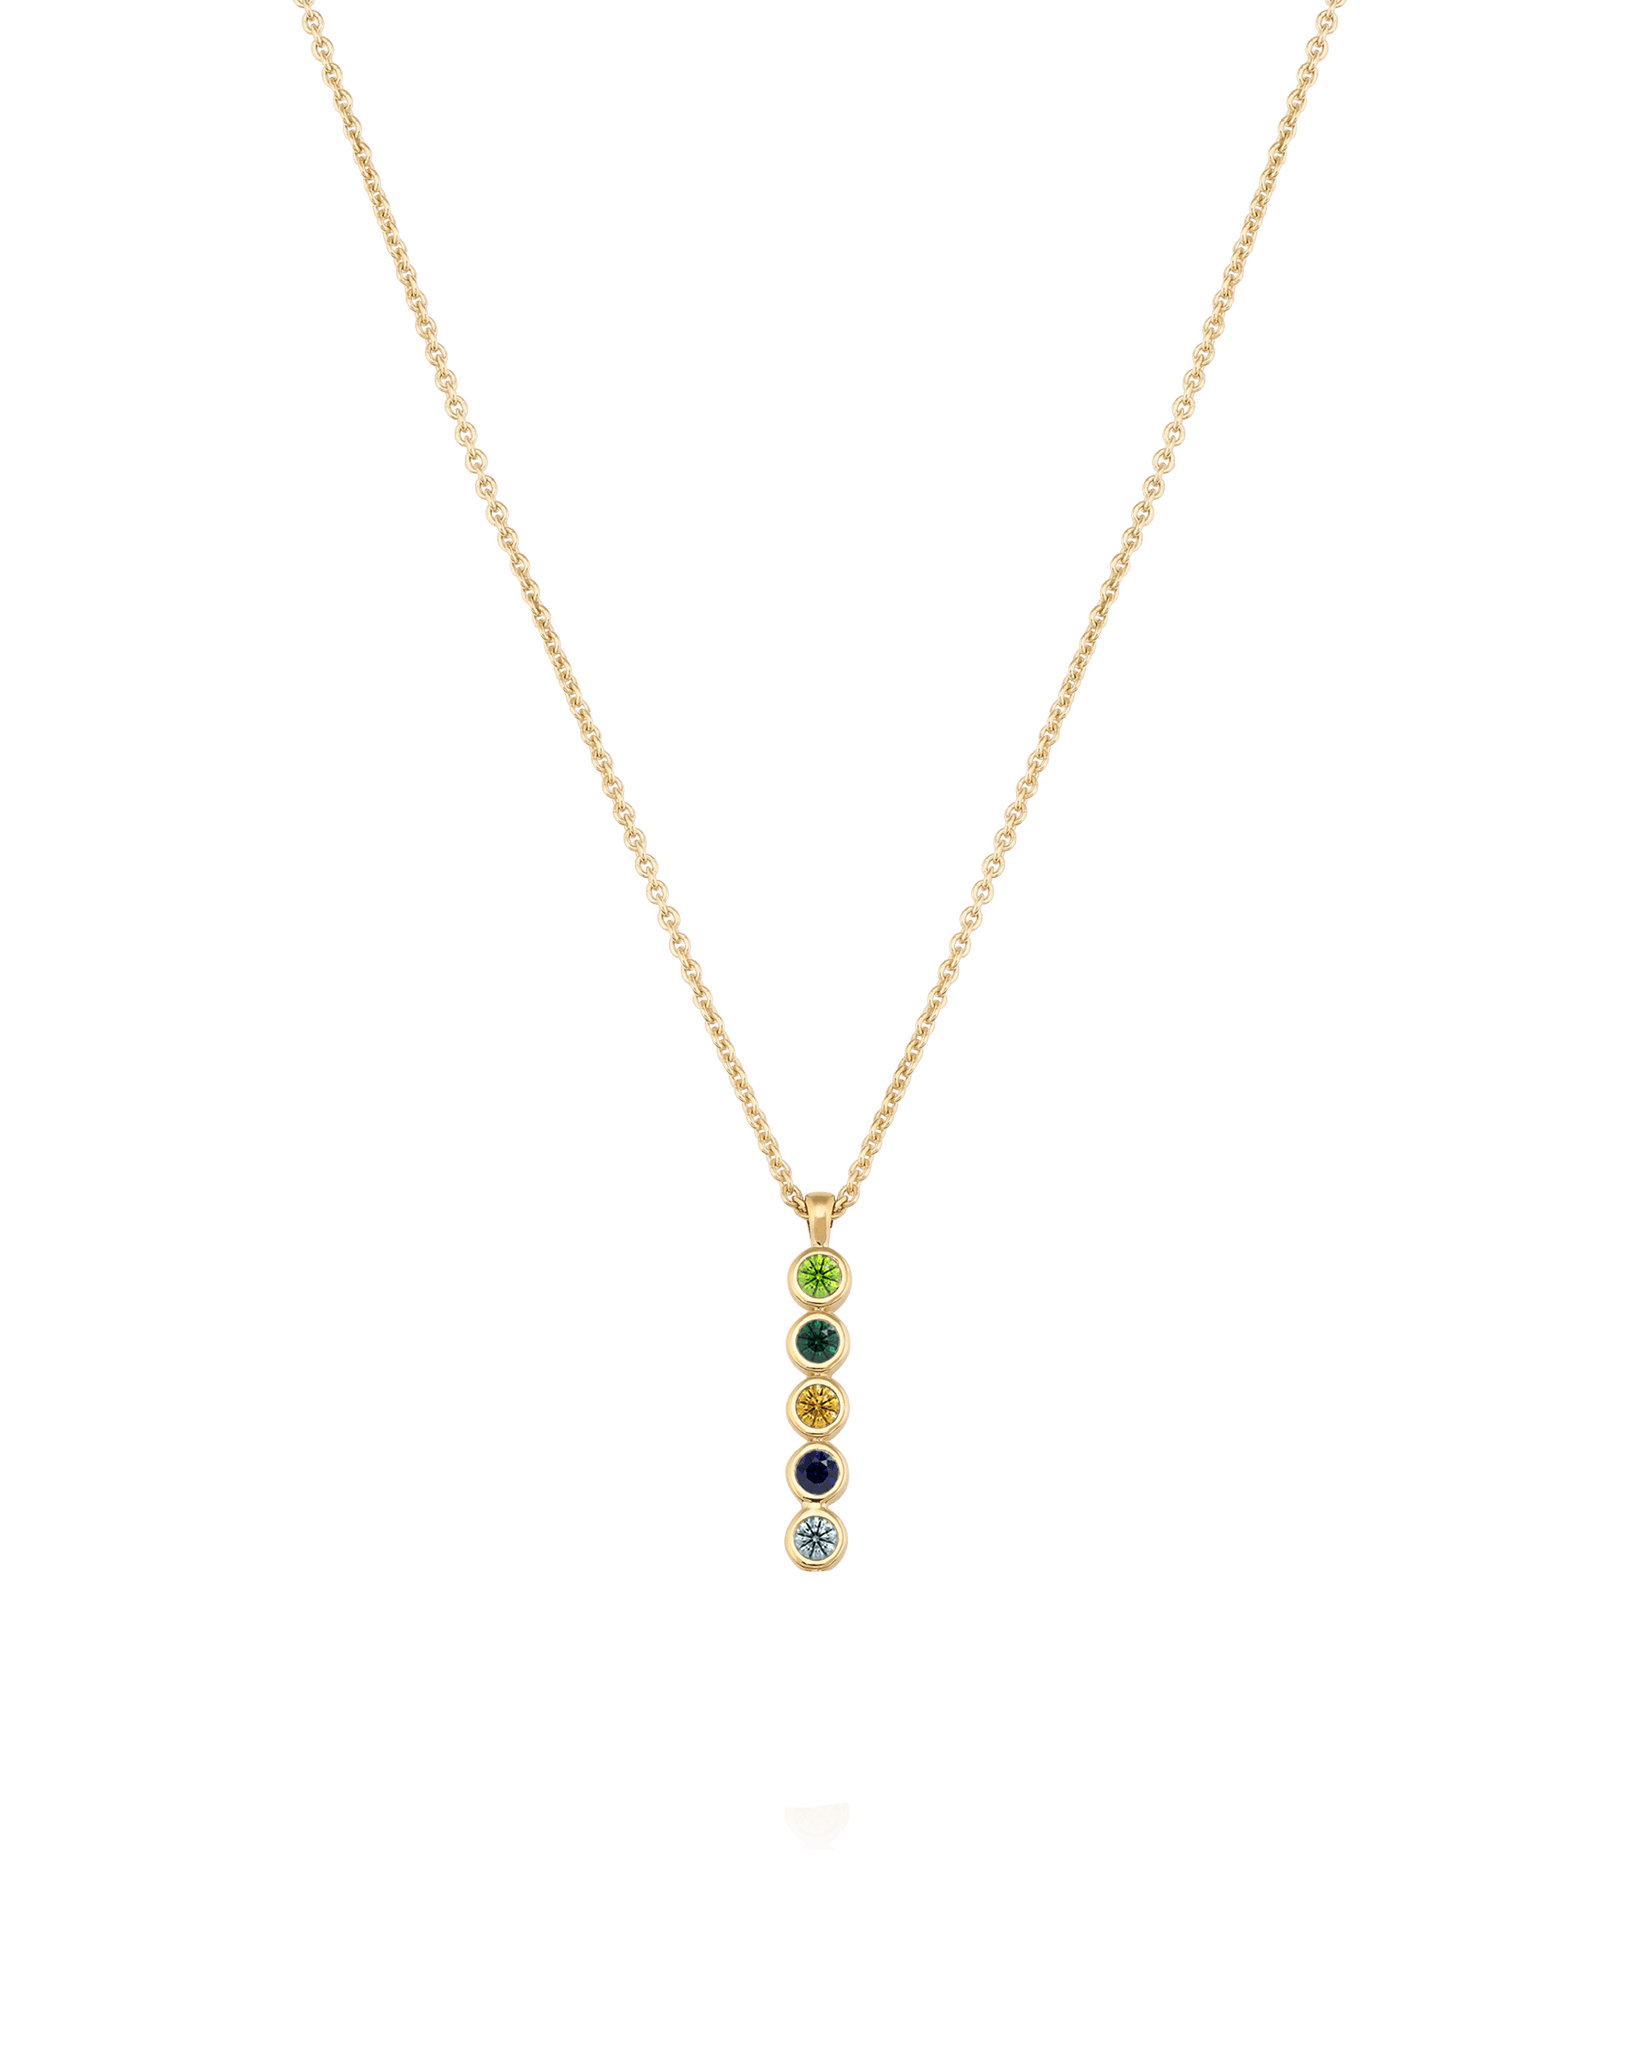 Birthstone Bar Chain Necklace - 925 Sterling Silver Necklaces 925 Silver 